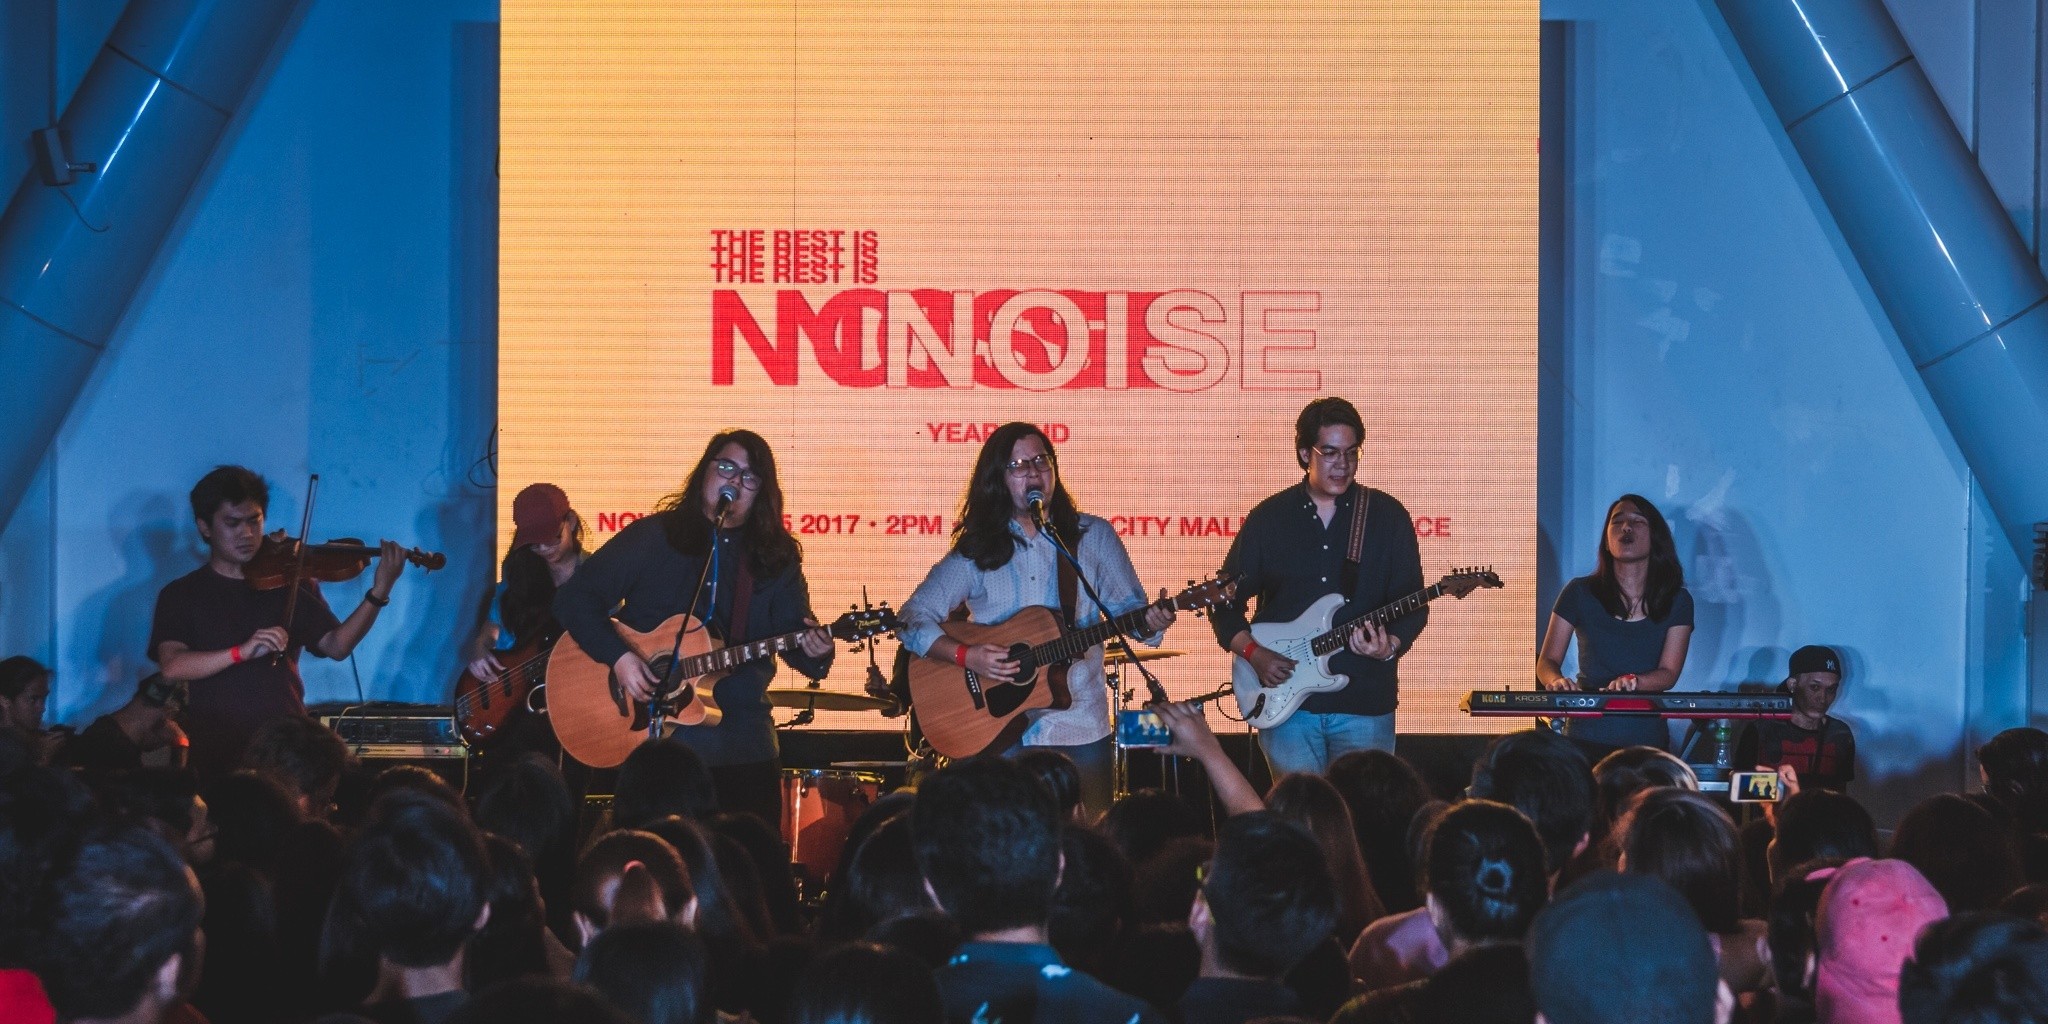 Music and advocacy take center stage at The Rest Is Noise Year End Gig